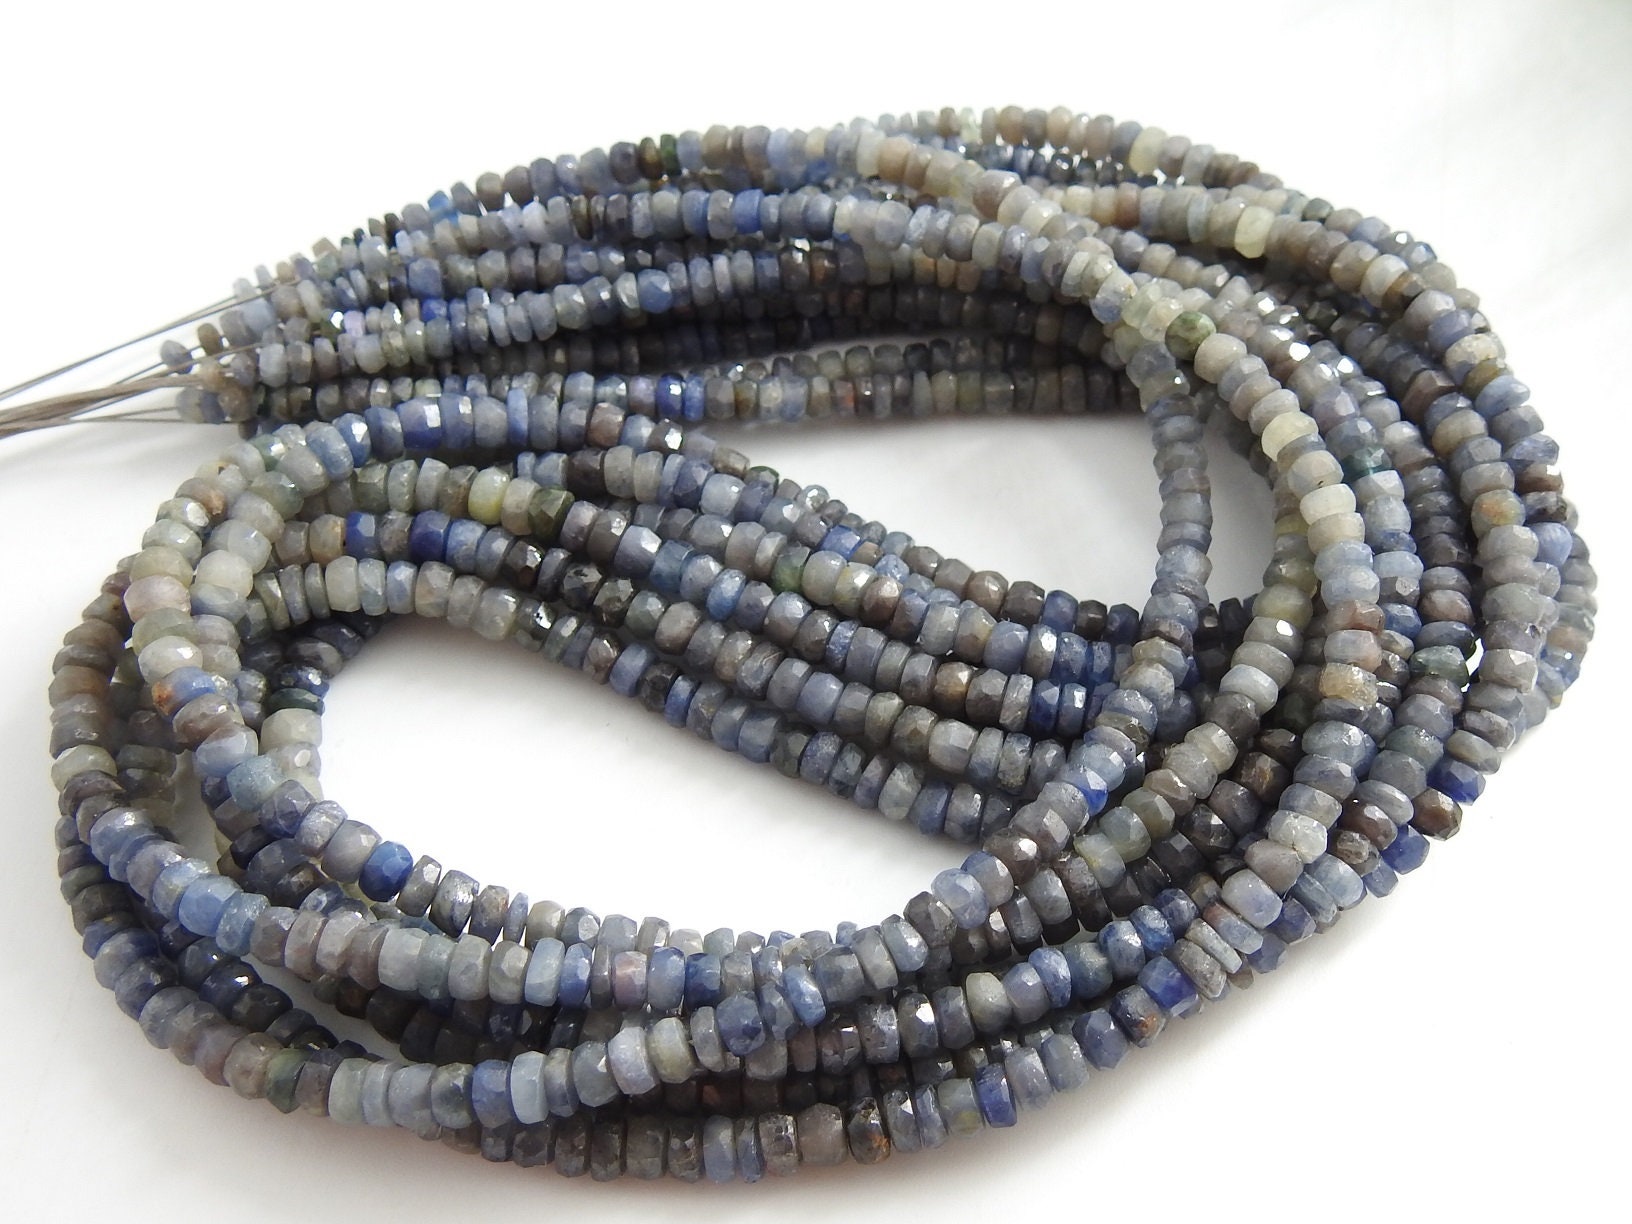 Blue Sapphire Faceted Roundel Bead,Multi Shaded,Burma Mines,Loose Stone,Handmade,For Jewelry Makers,16Inch Strand,100%Natural PMEB-13 | Save 33% - Rajasthan Living 25